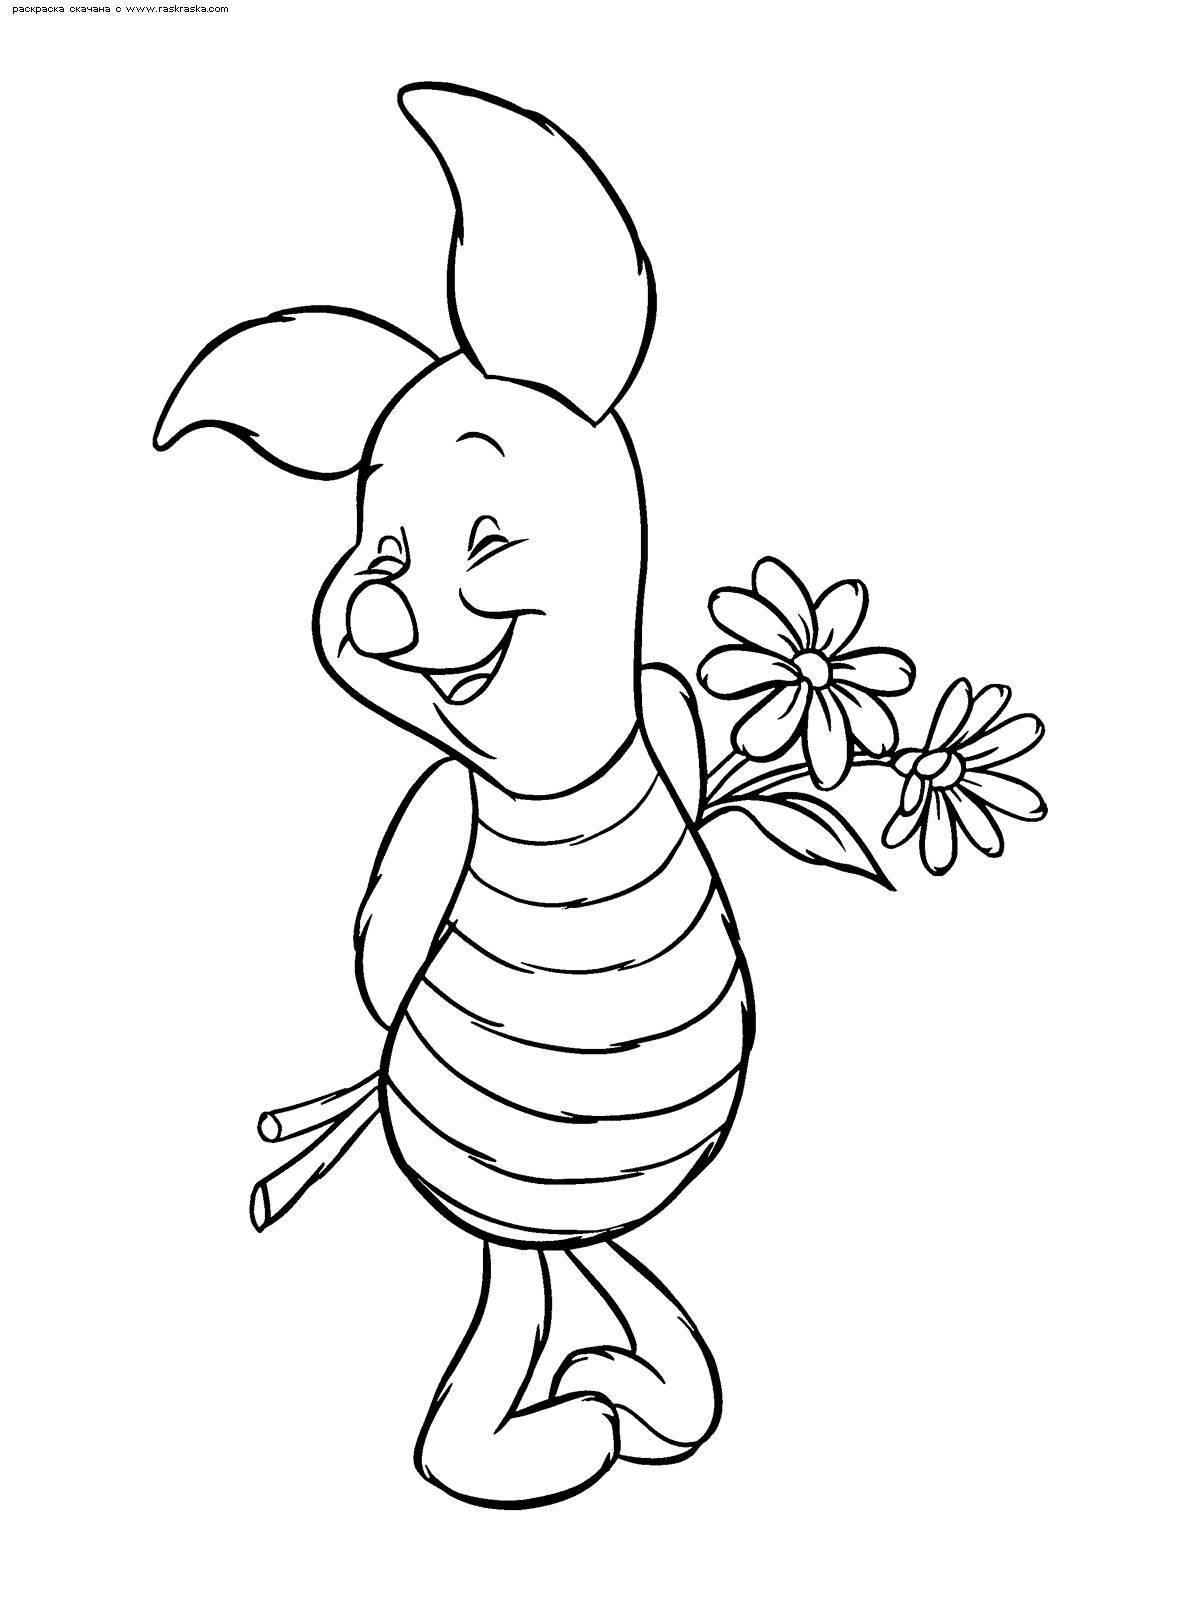 Coloring page giggling pig